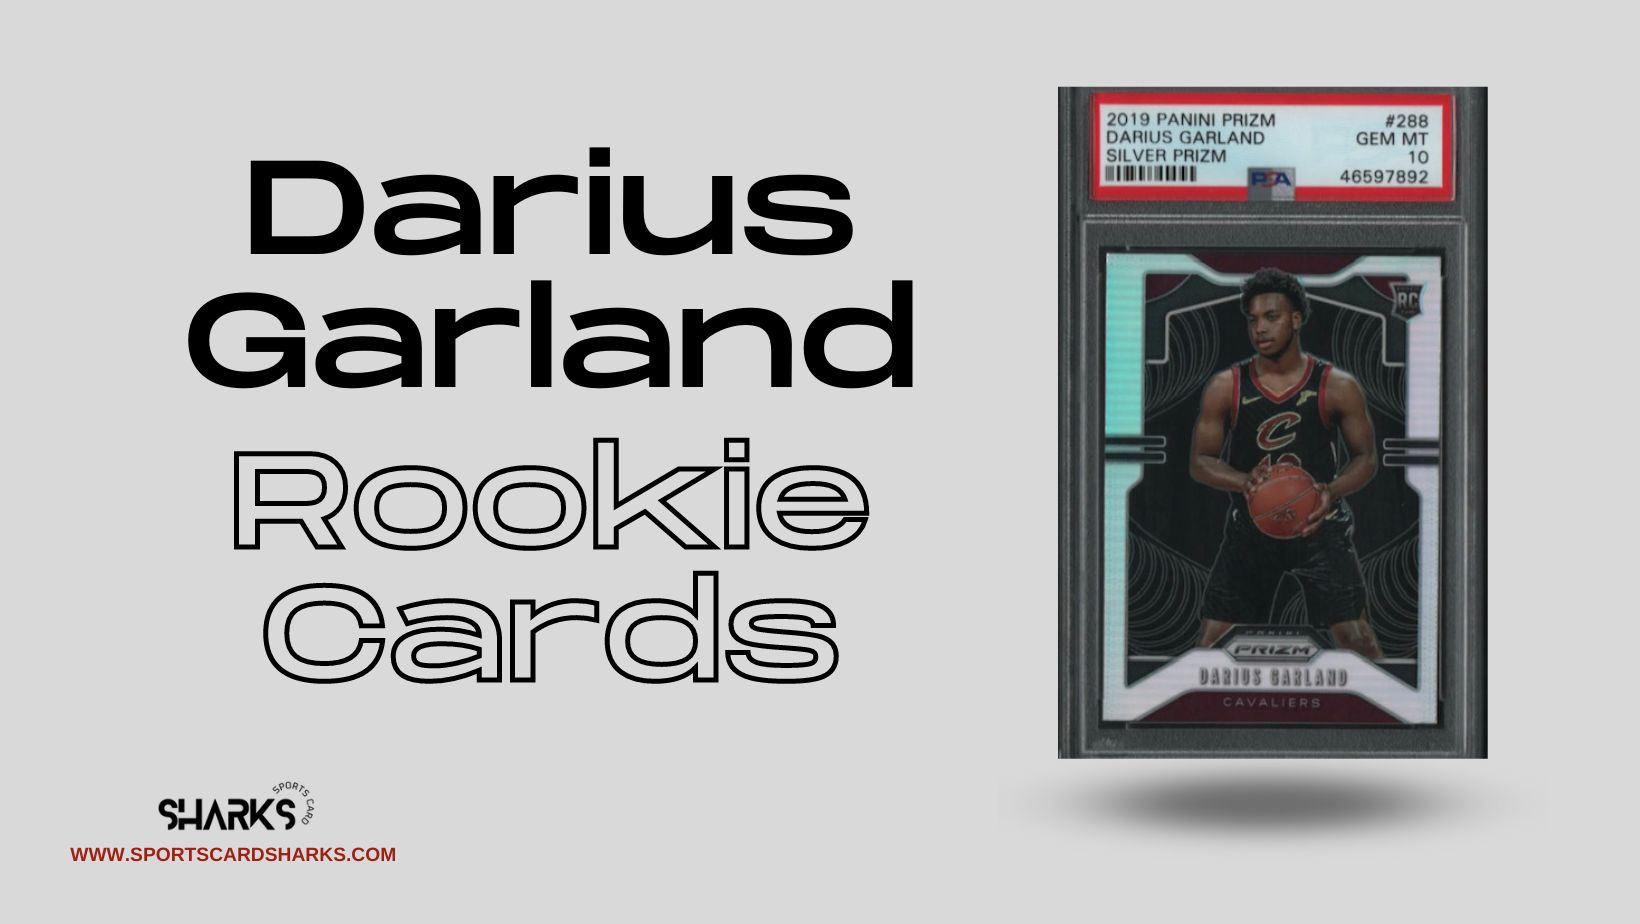 Featured image for the Best Darius Garland Rookie Cards blog post on Sports Card Sharks